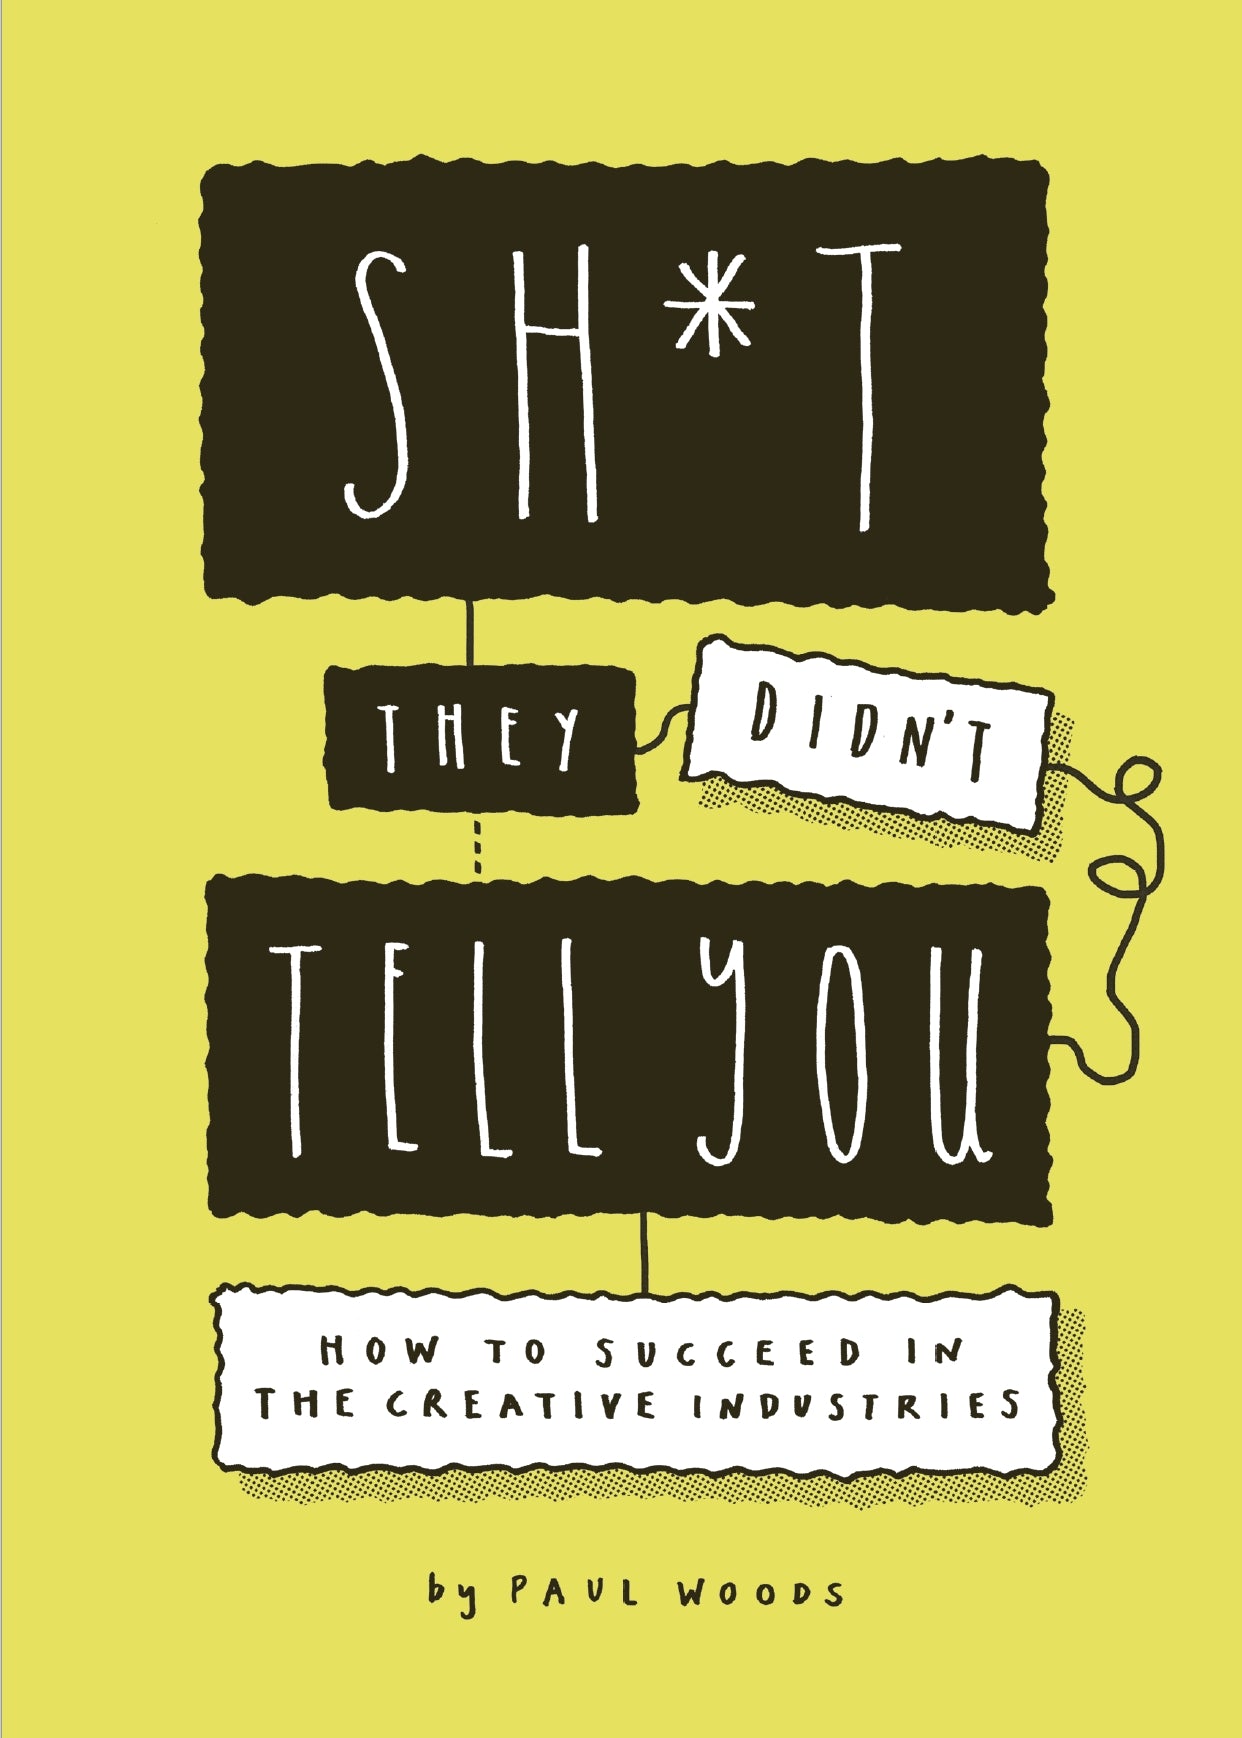 Sh*t They Didn't Tell You by Paul Woods